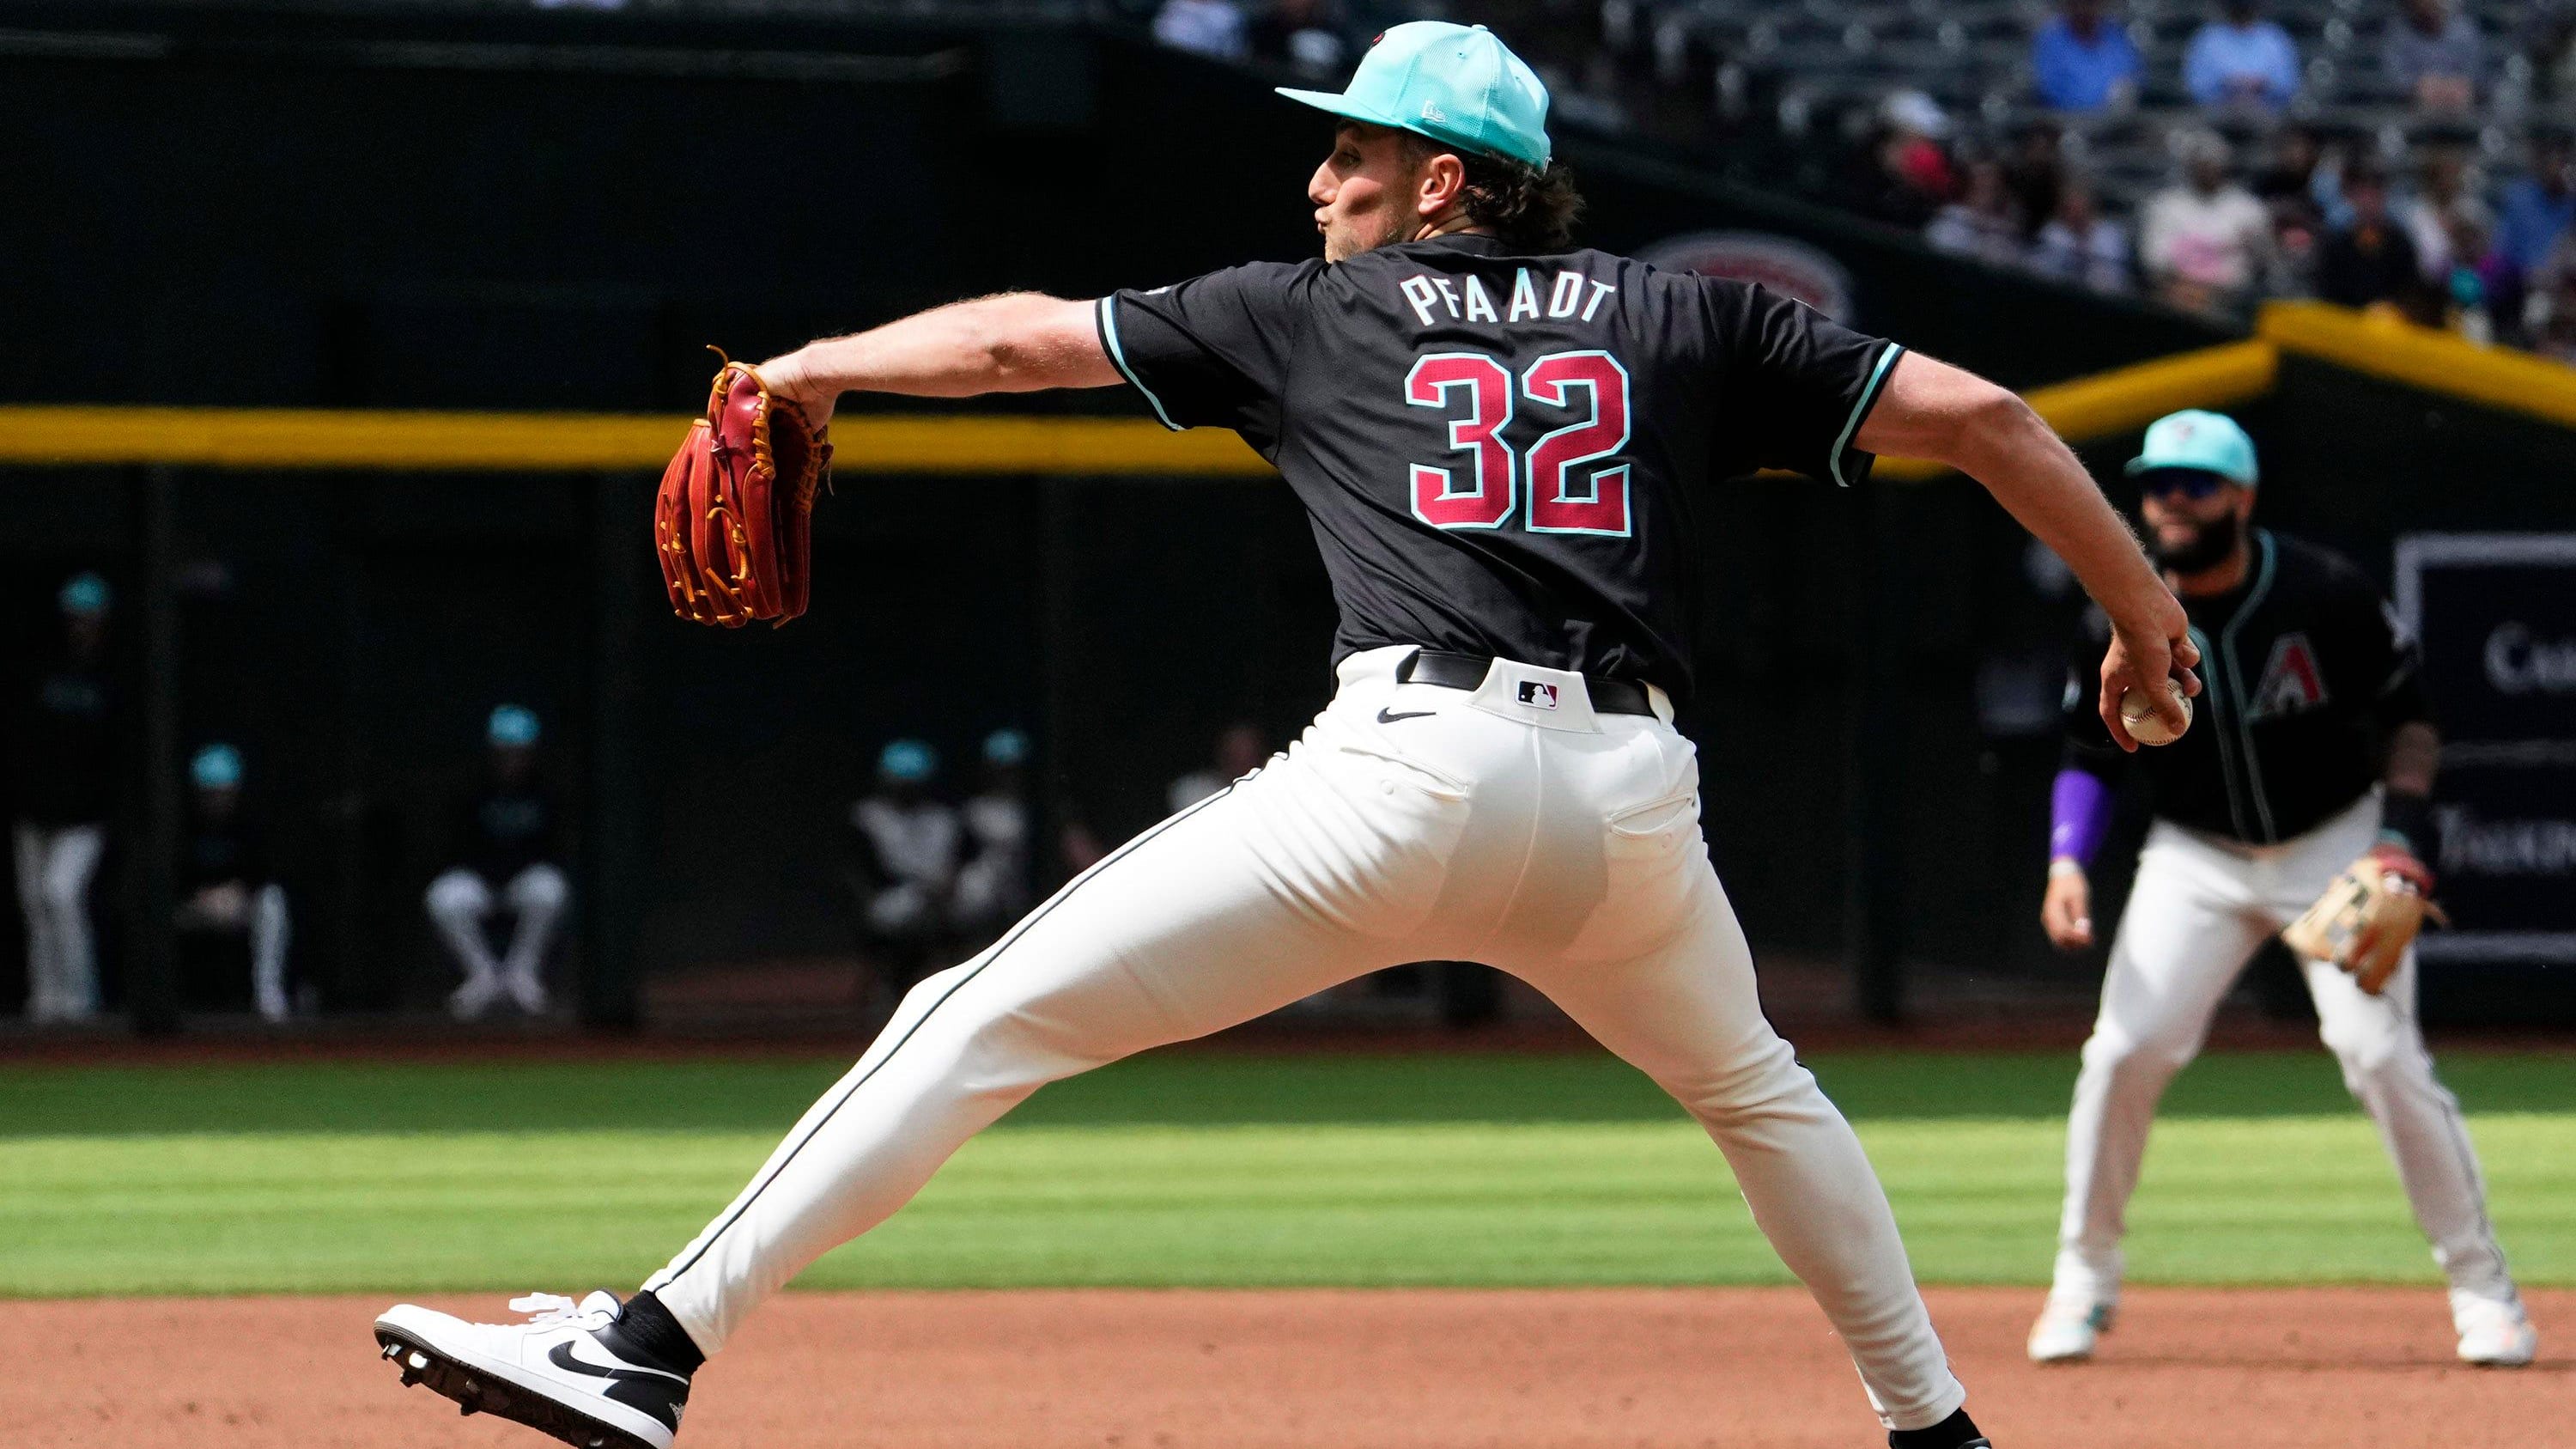 Arizona Diamondbacks right-handed pitcher Brandon Pfaadt pitches against the Cleveland Guardians at Chase Field.